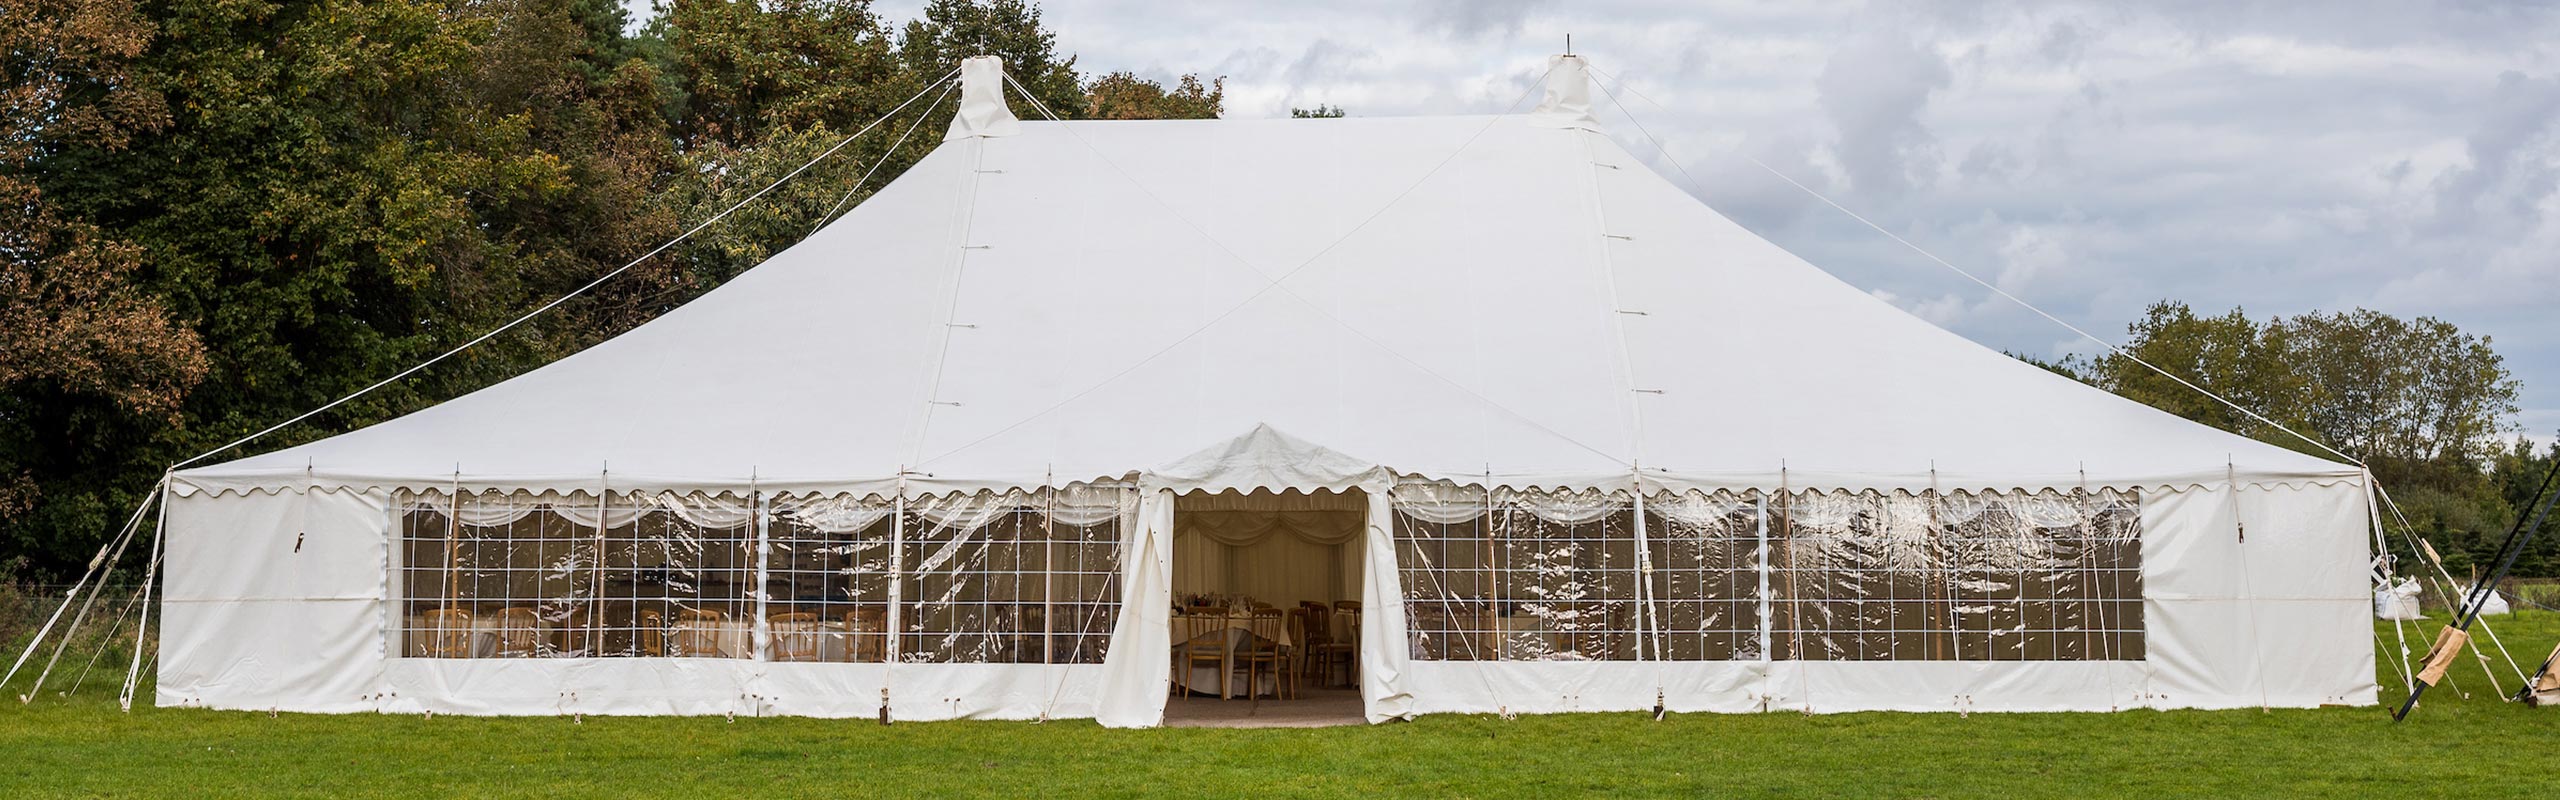 marquee hire norwich prices 